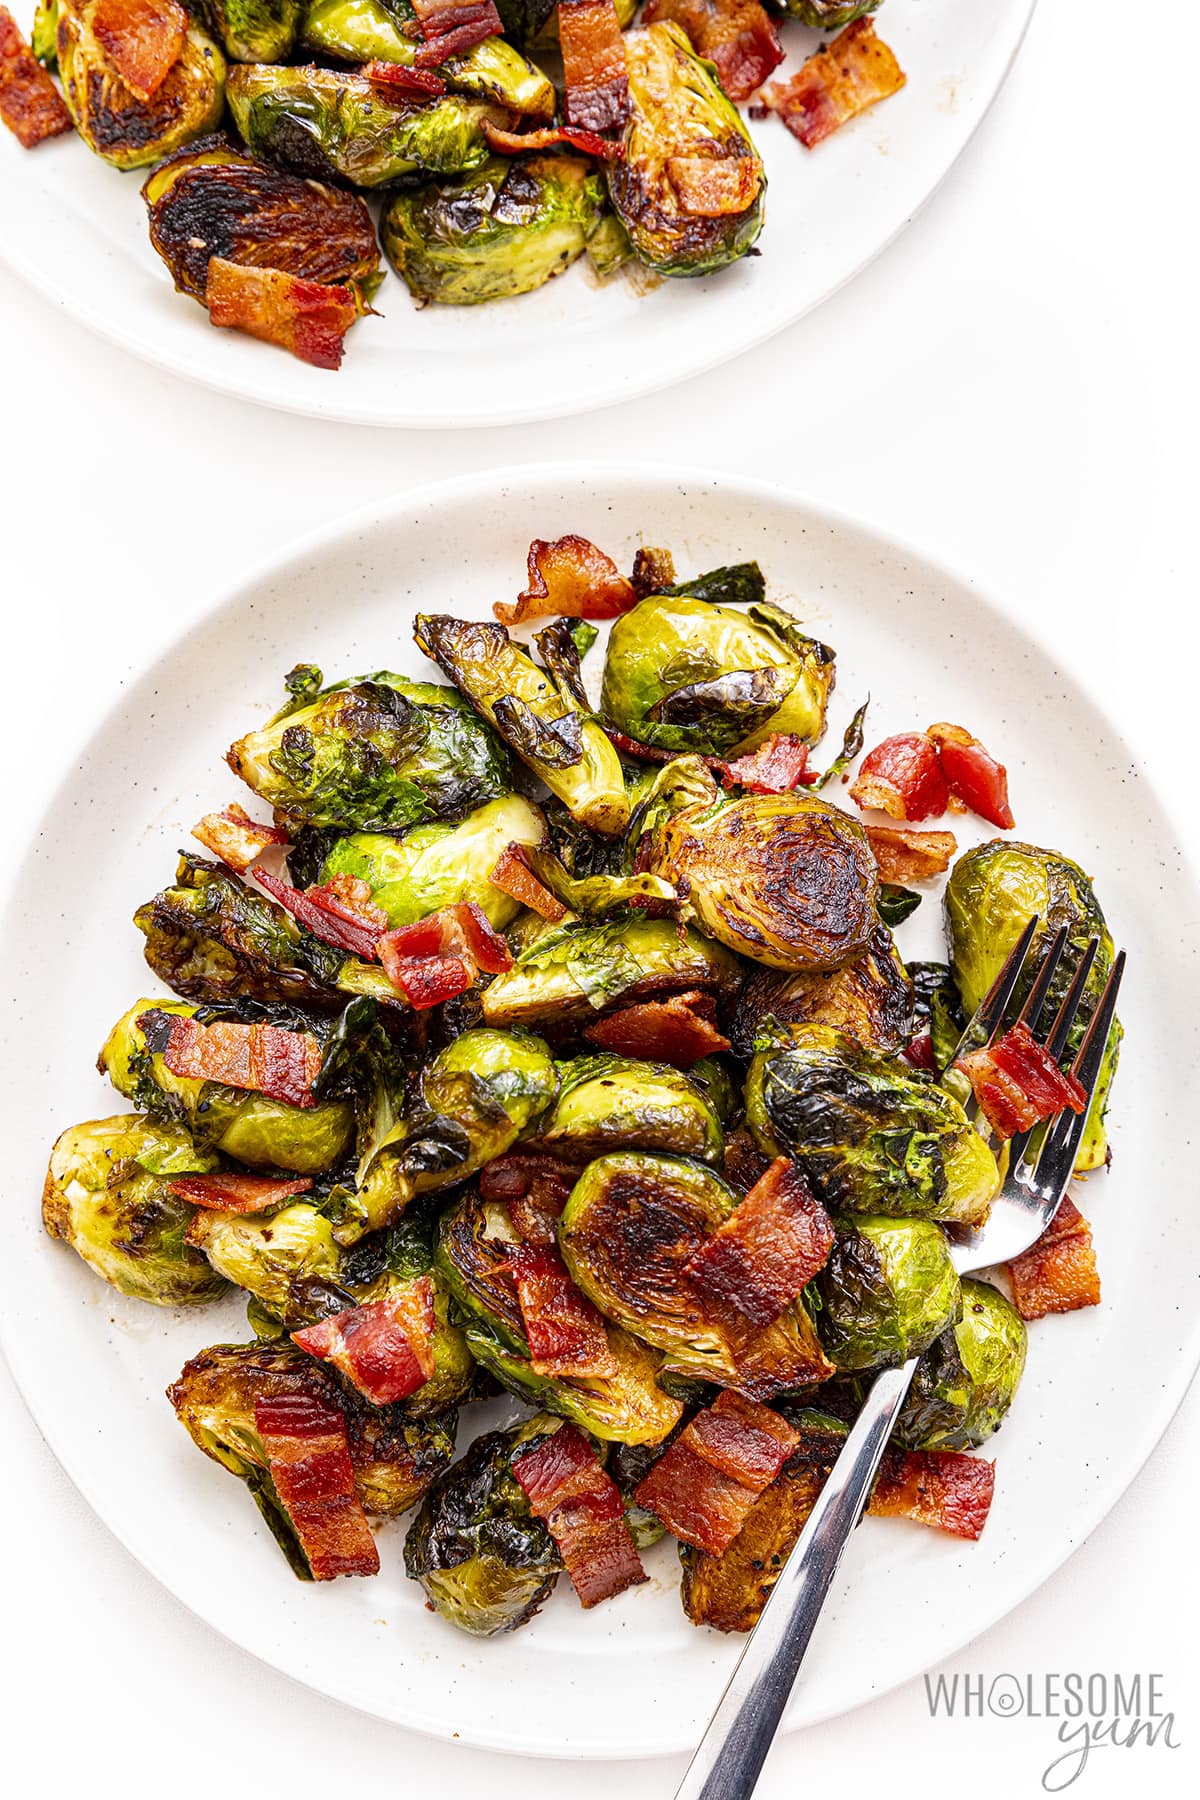 Use a fork to fry the Brussels sprouts on two plates.